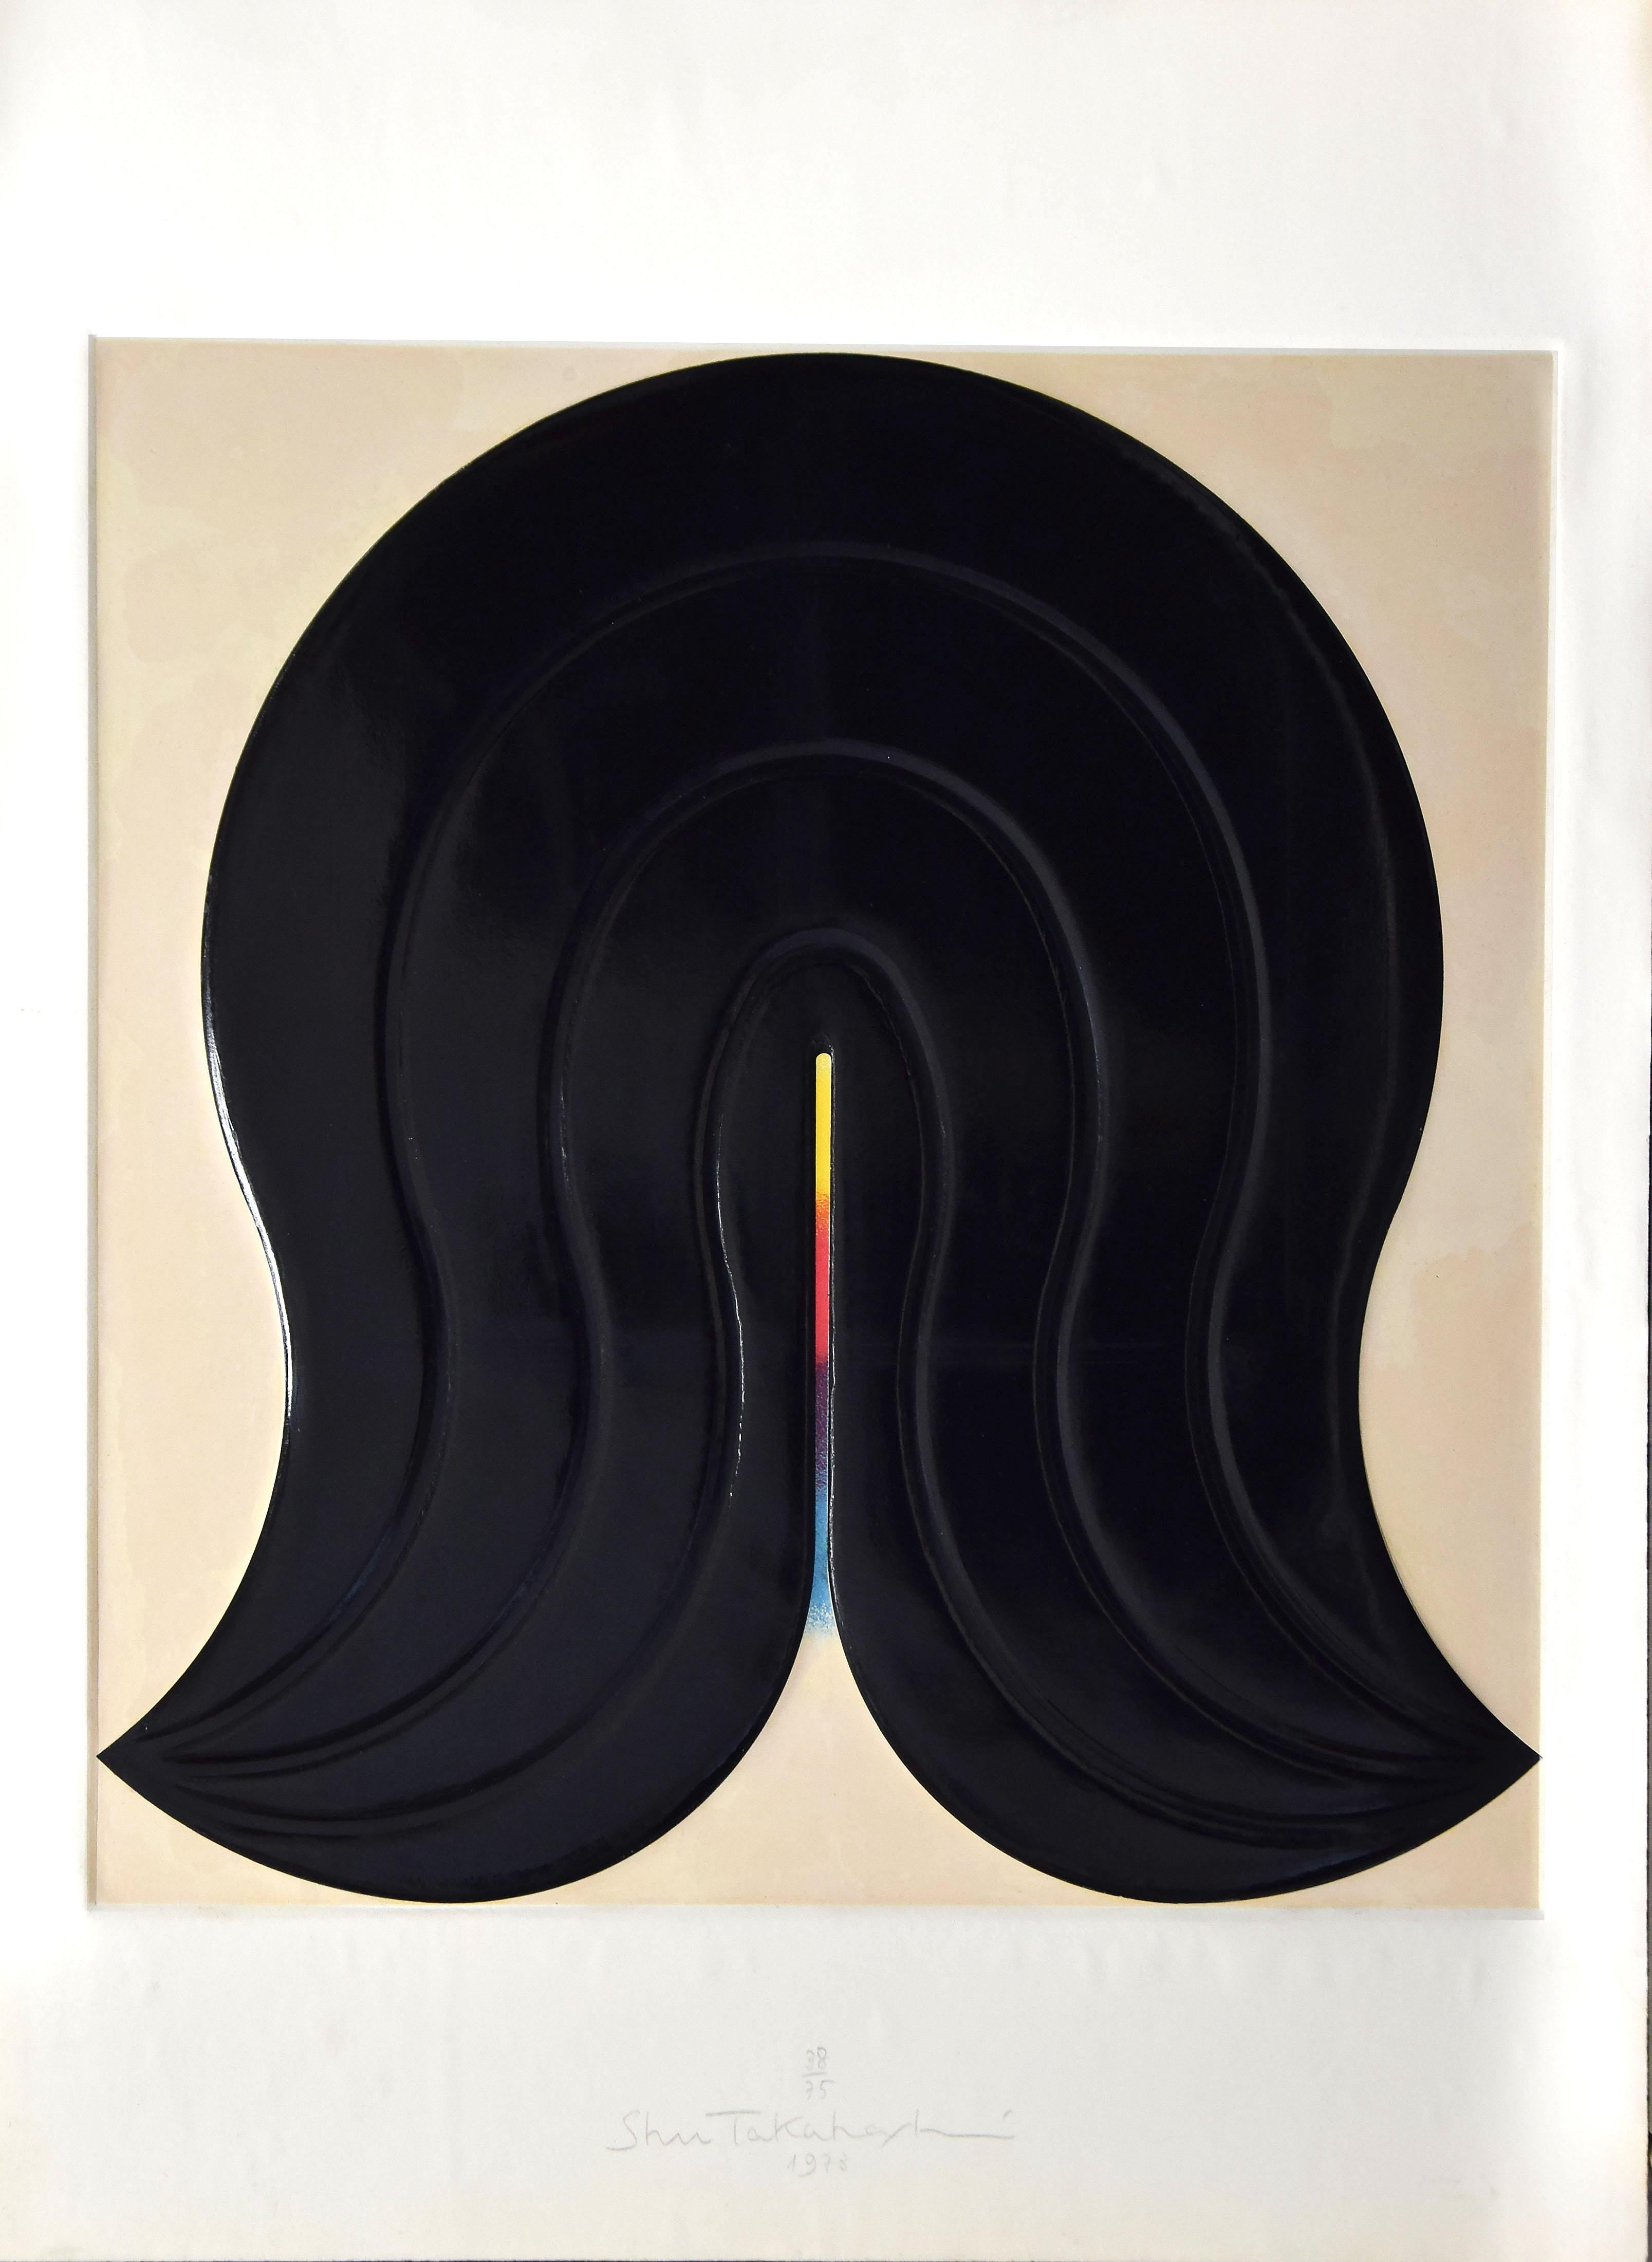 Black Figure is an abstract silk-screen and copperplate engraving print on heavy paper, realized in 1973 by the Japanese artist Shu Takahashi. 

Hand signed, numbered and dated on the lower margin. Edition of 75.

The artwork is glued on linoleum